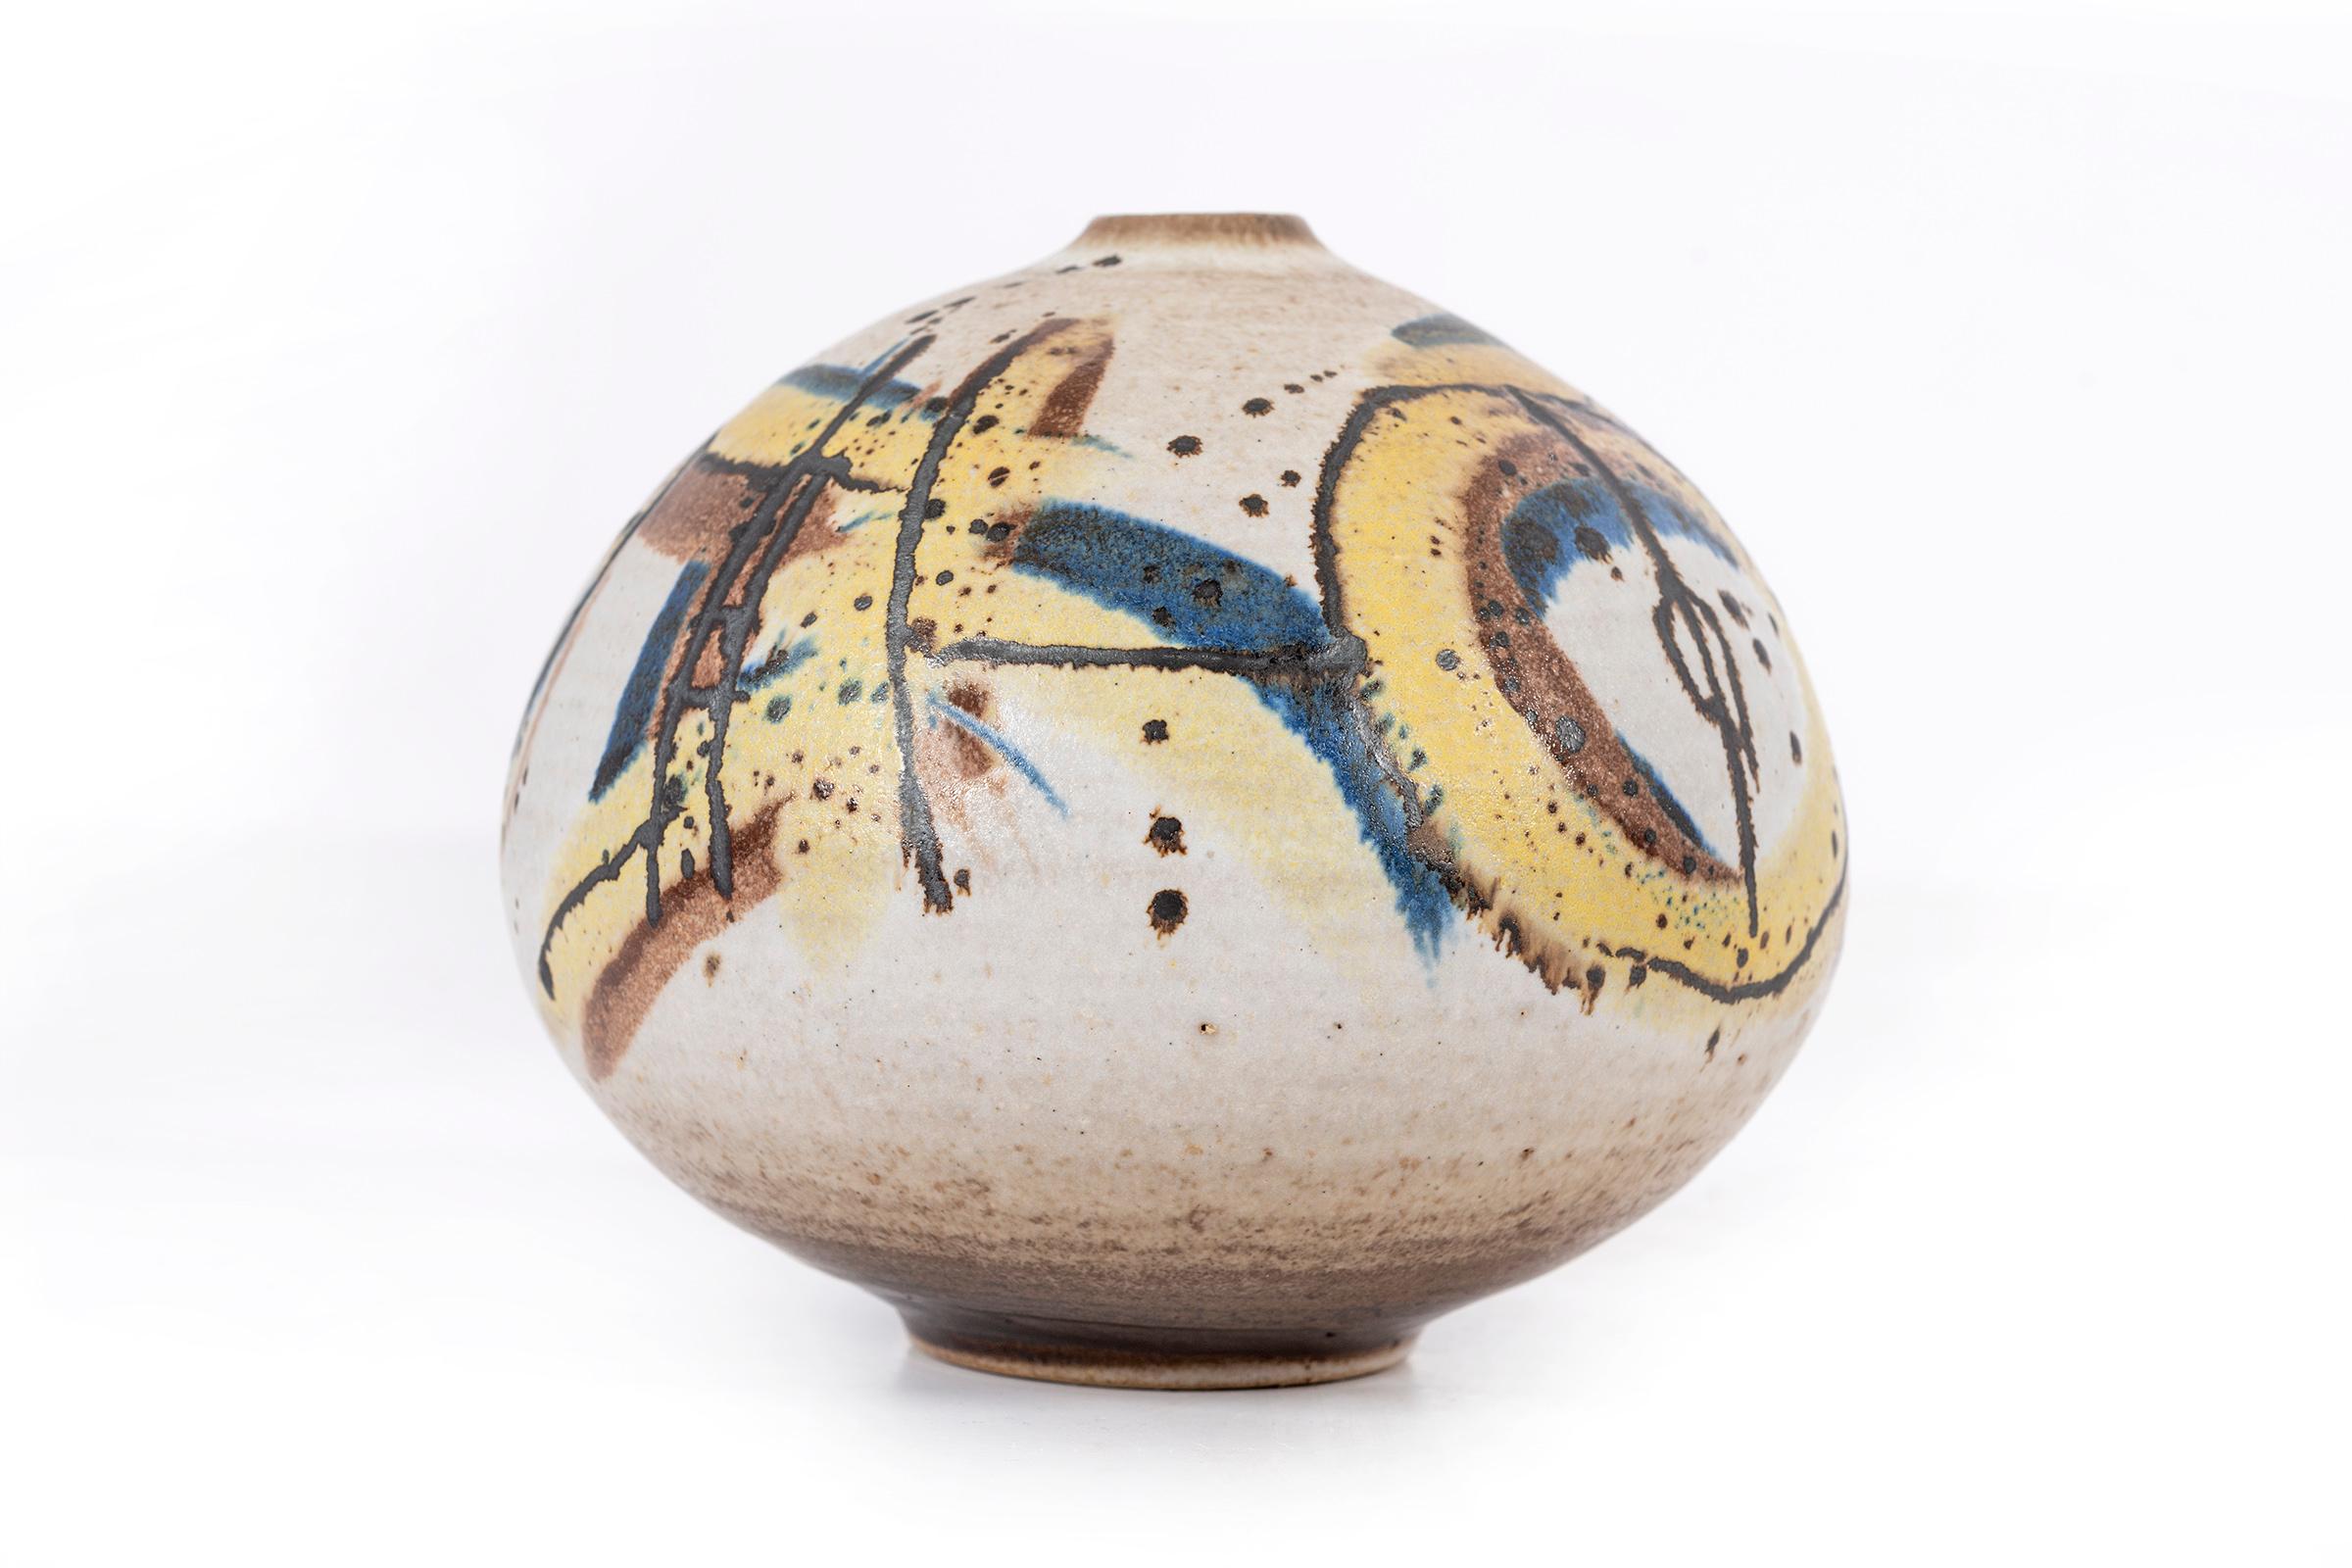 Clyde Burt ceramic vase in glazed stoneware with abstract multicolored glaze.
Signed to underside: [CB].
American, circa 1965.